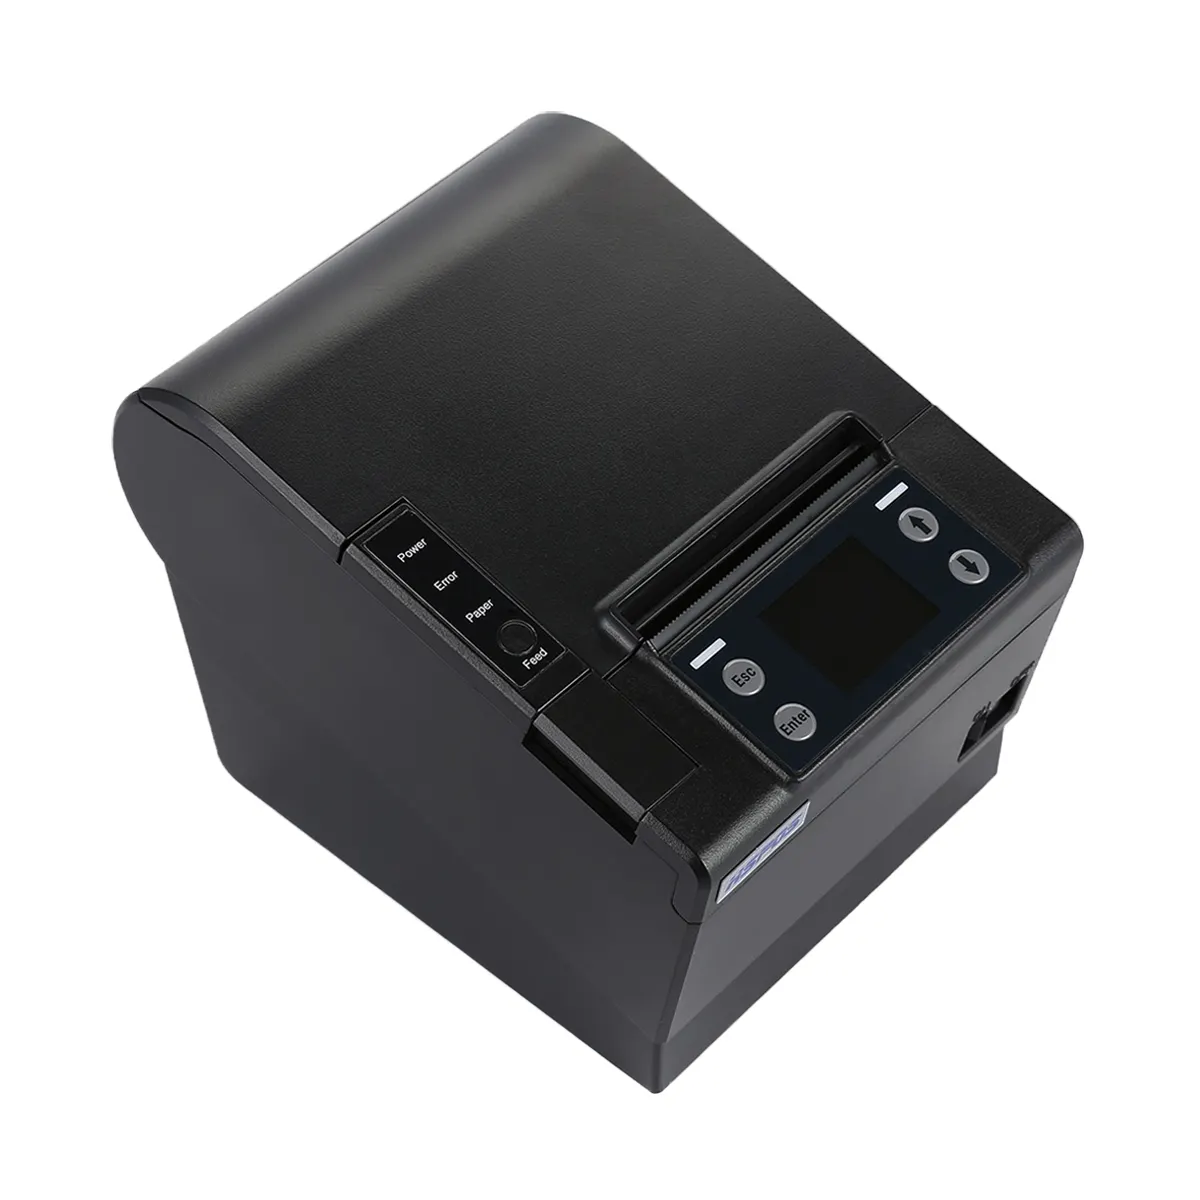 Auto-Cutting Feature For Receipts 80Mm Cloud Printer Thermal Printer Sticker With Receipt Printer Roll